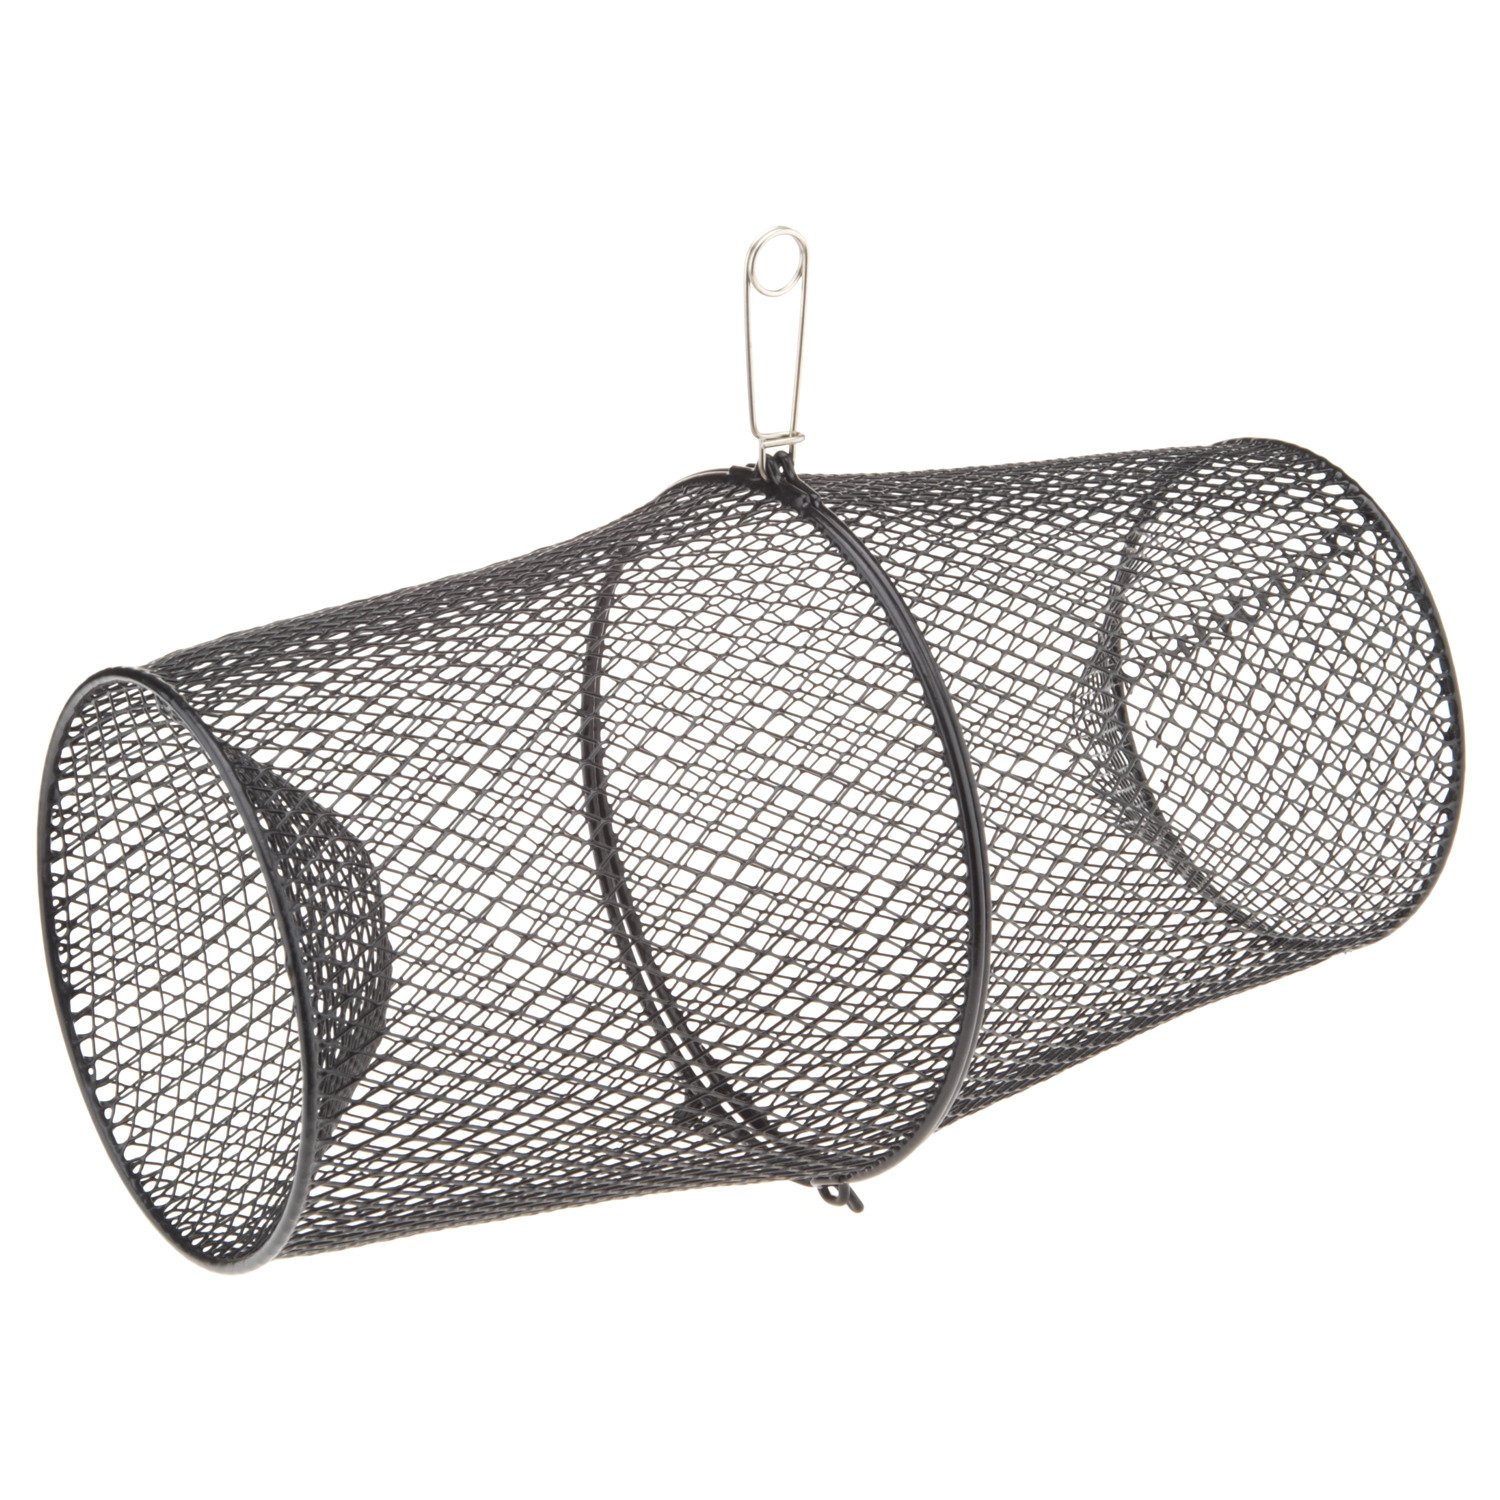 Academy Sports + Outdoors Frabill 16.5 x 9 Crawfish Trap